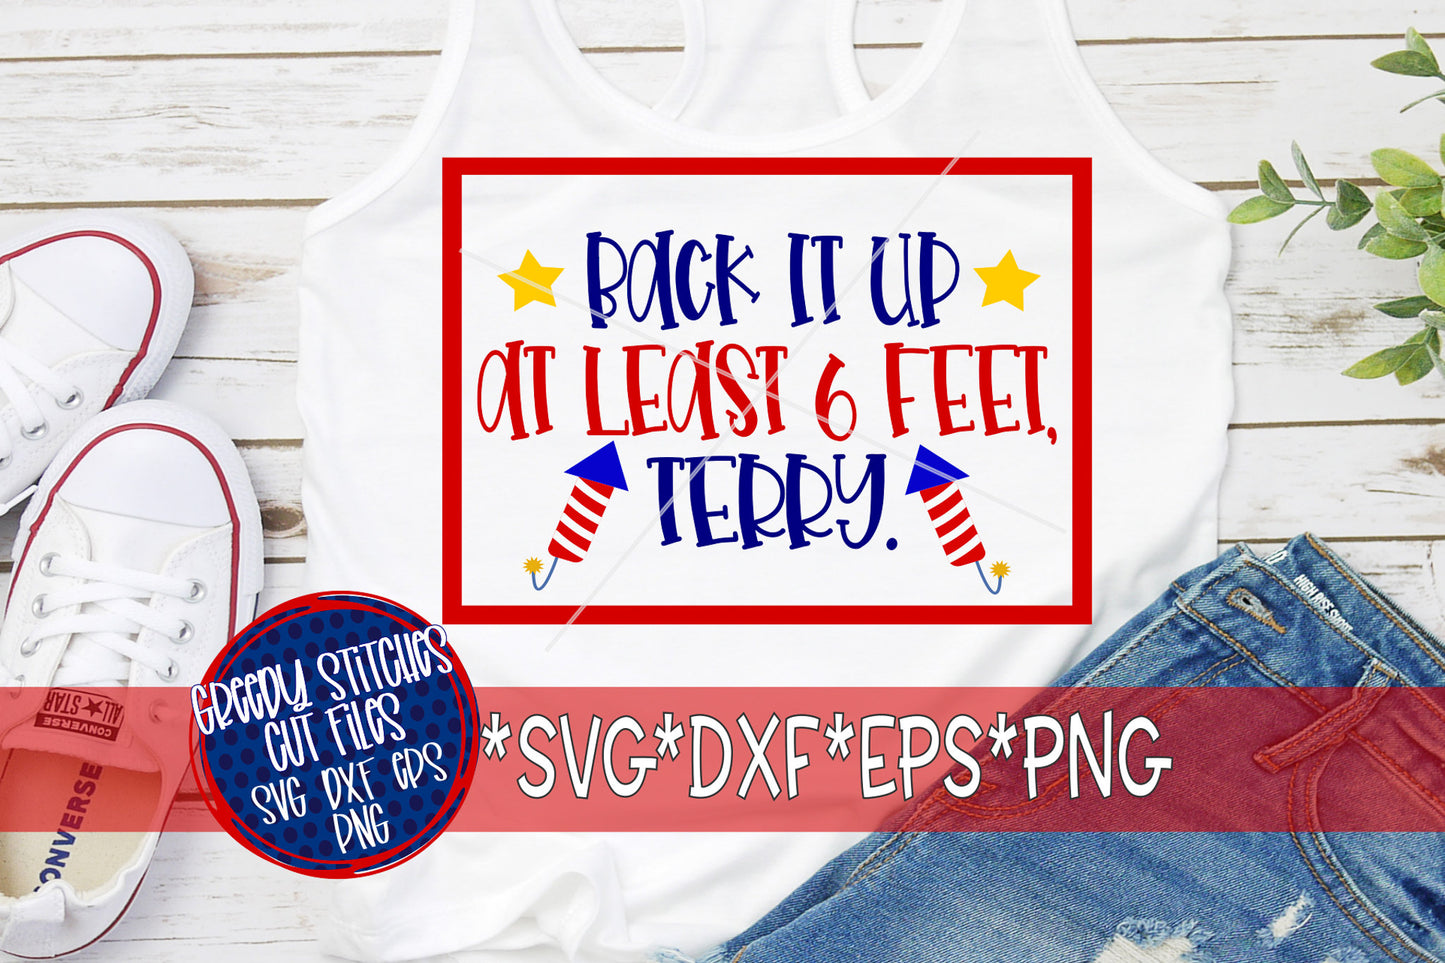 Back It Up At Least 6 Feet Terry svg, eps, dxf, png. July 4th SvG | Independence Day DxF | Back It Up Terry SvG | Instant Download Cut Files